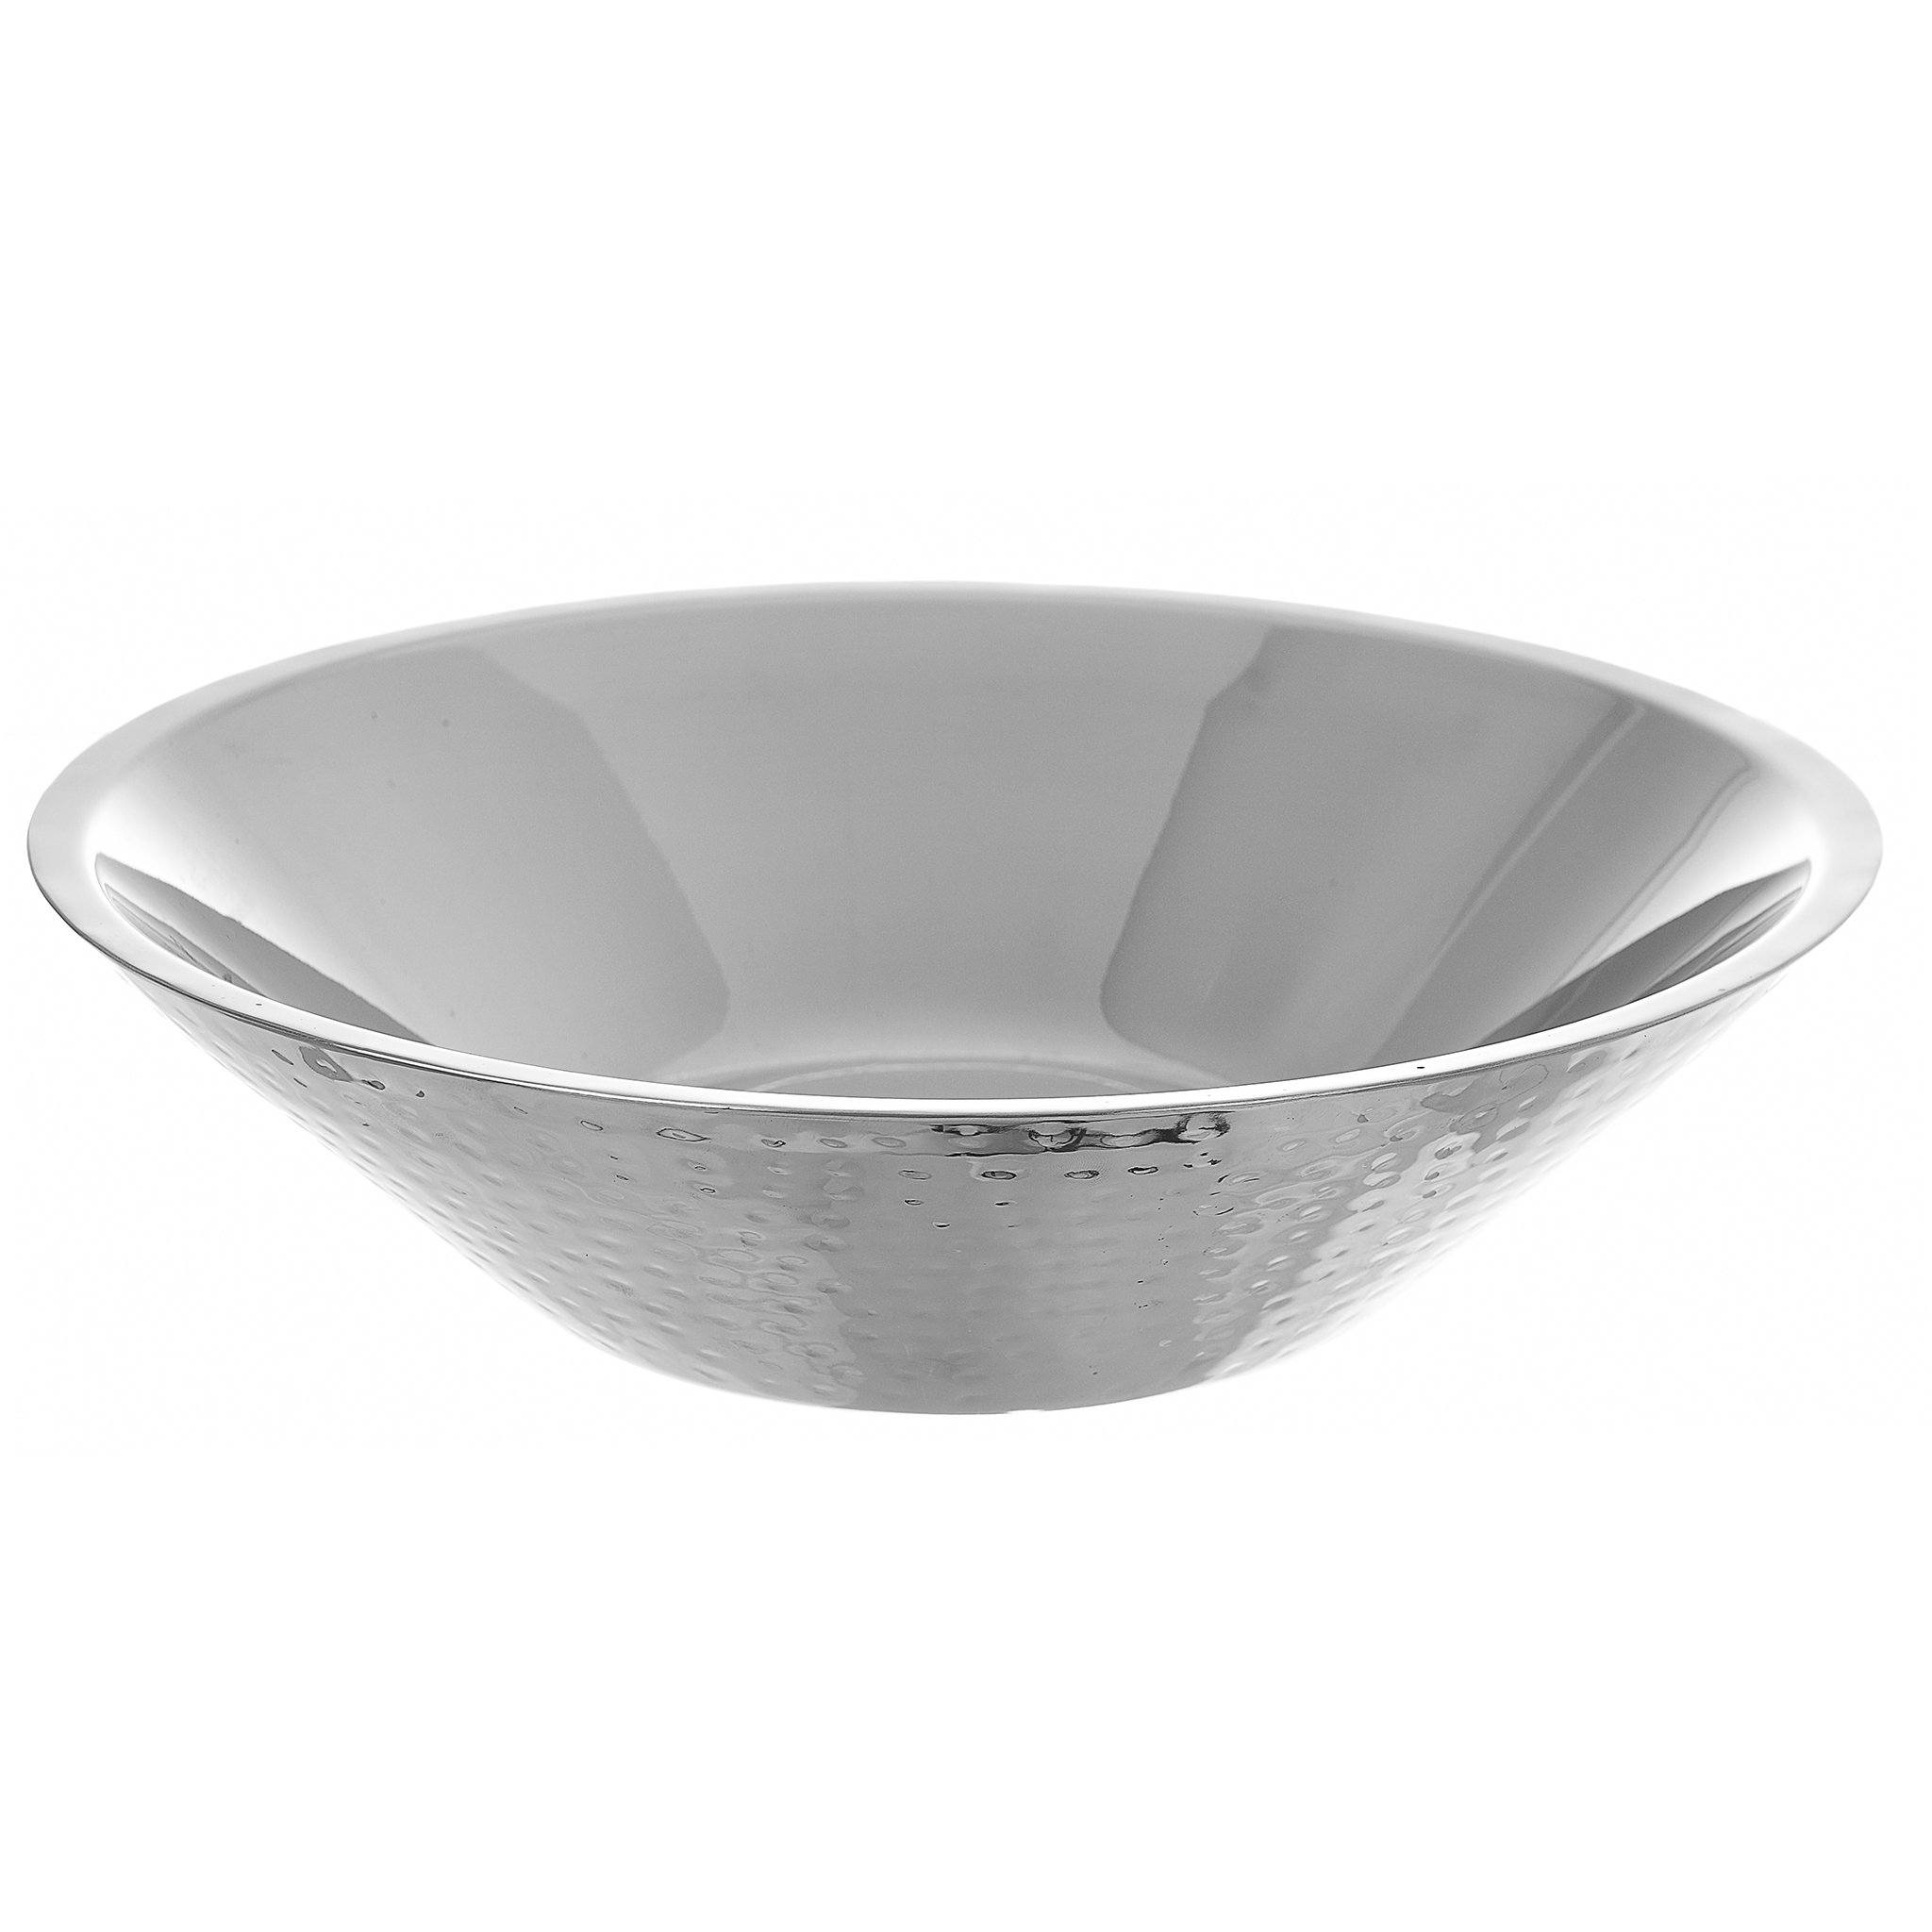 Round Hammered Bowl - Stainless Steel - 35cm - 80003995